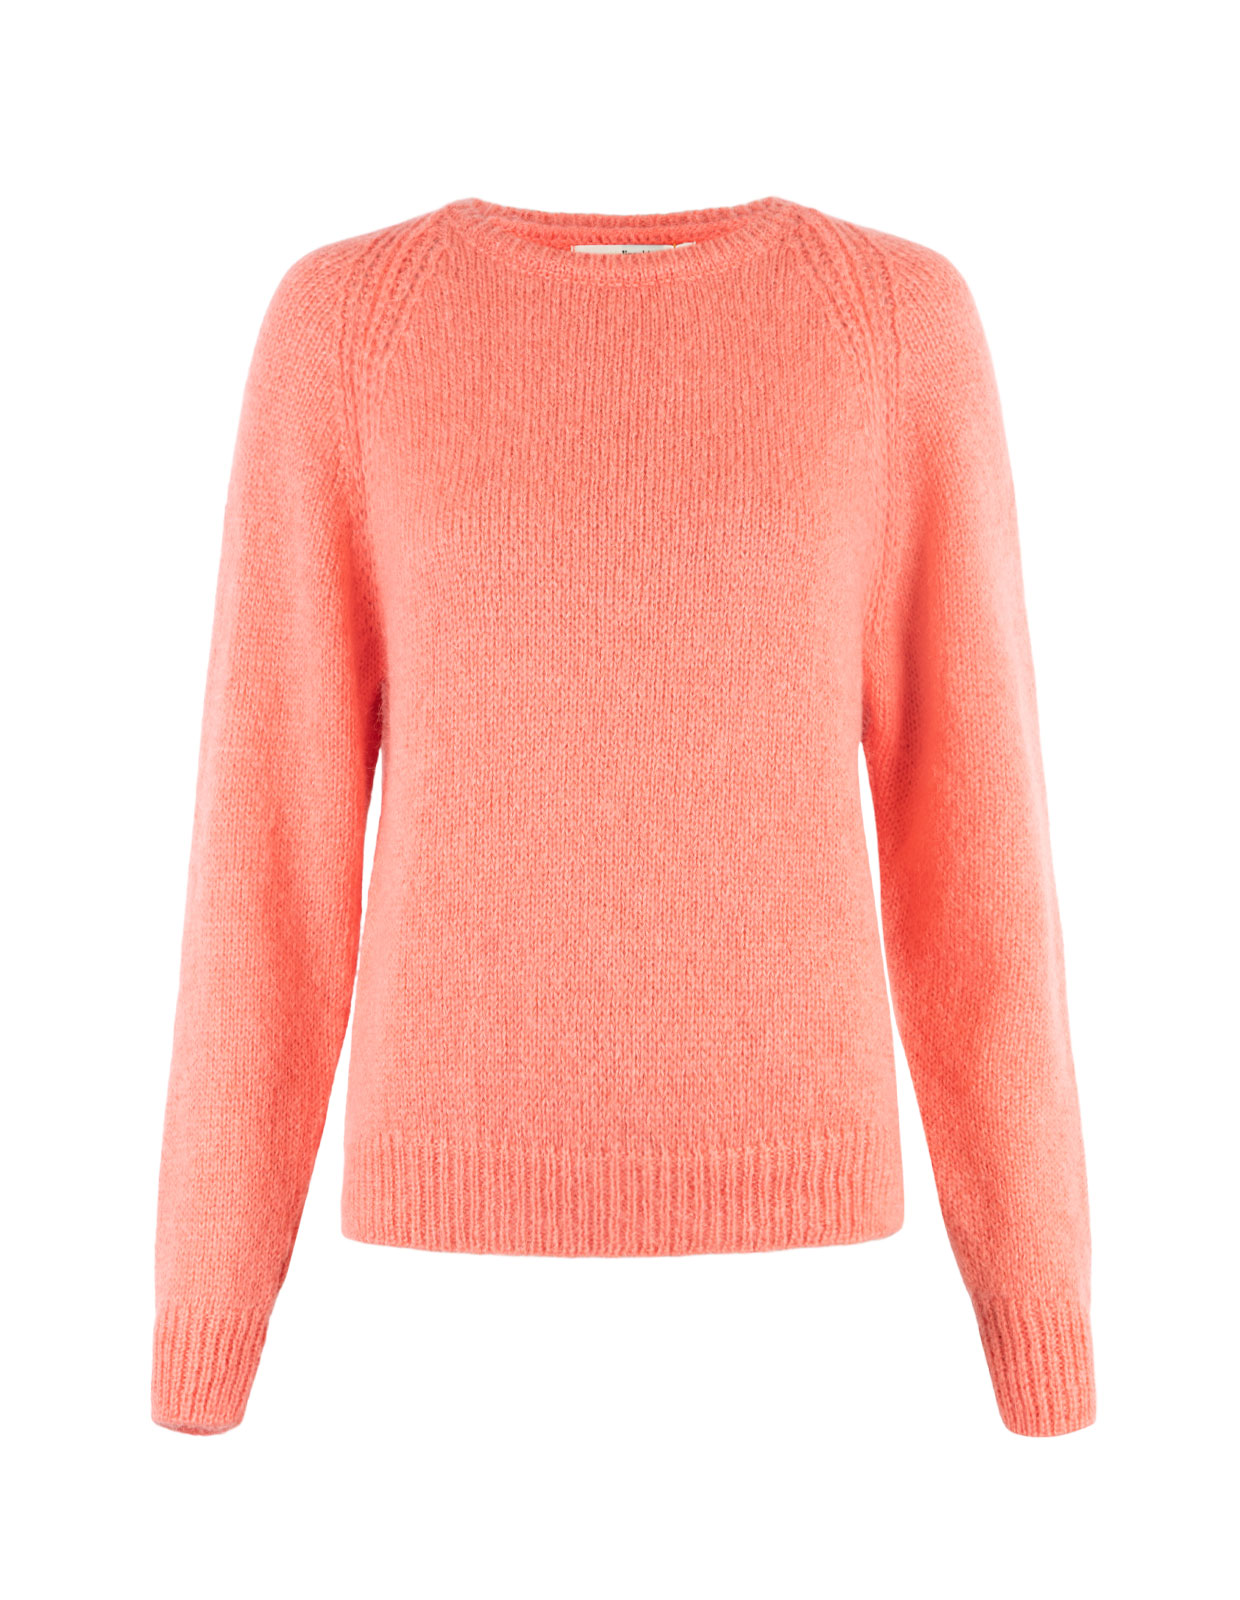 Wales Knitted Top Peach